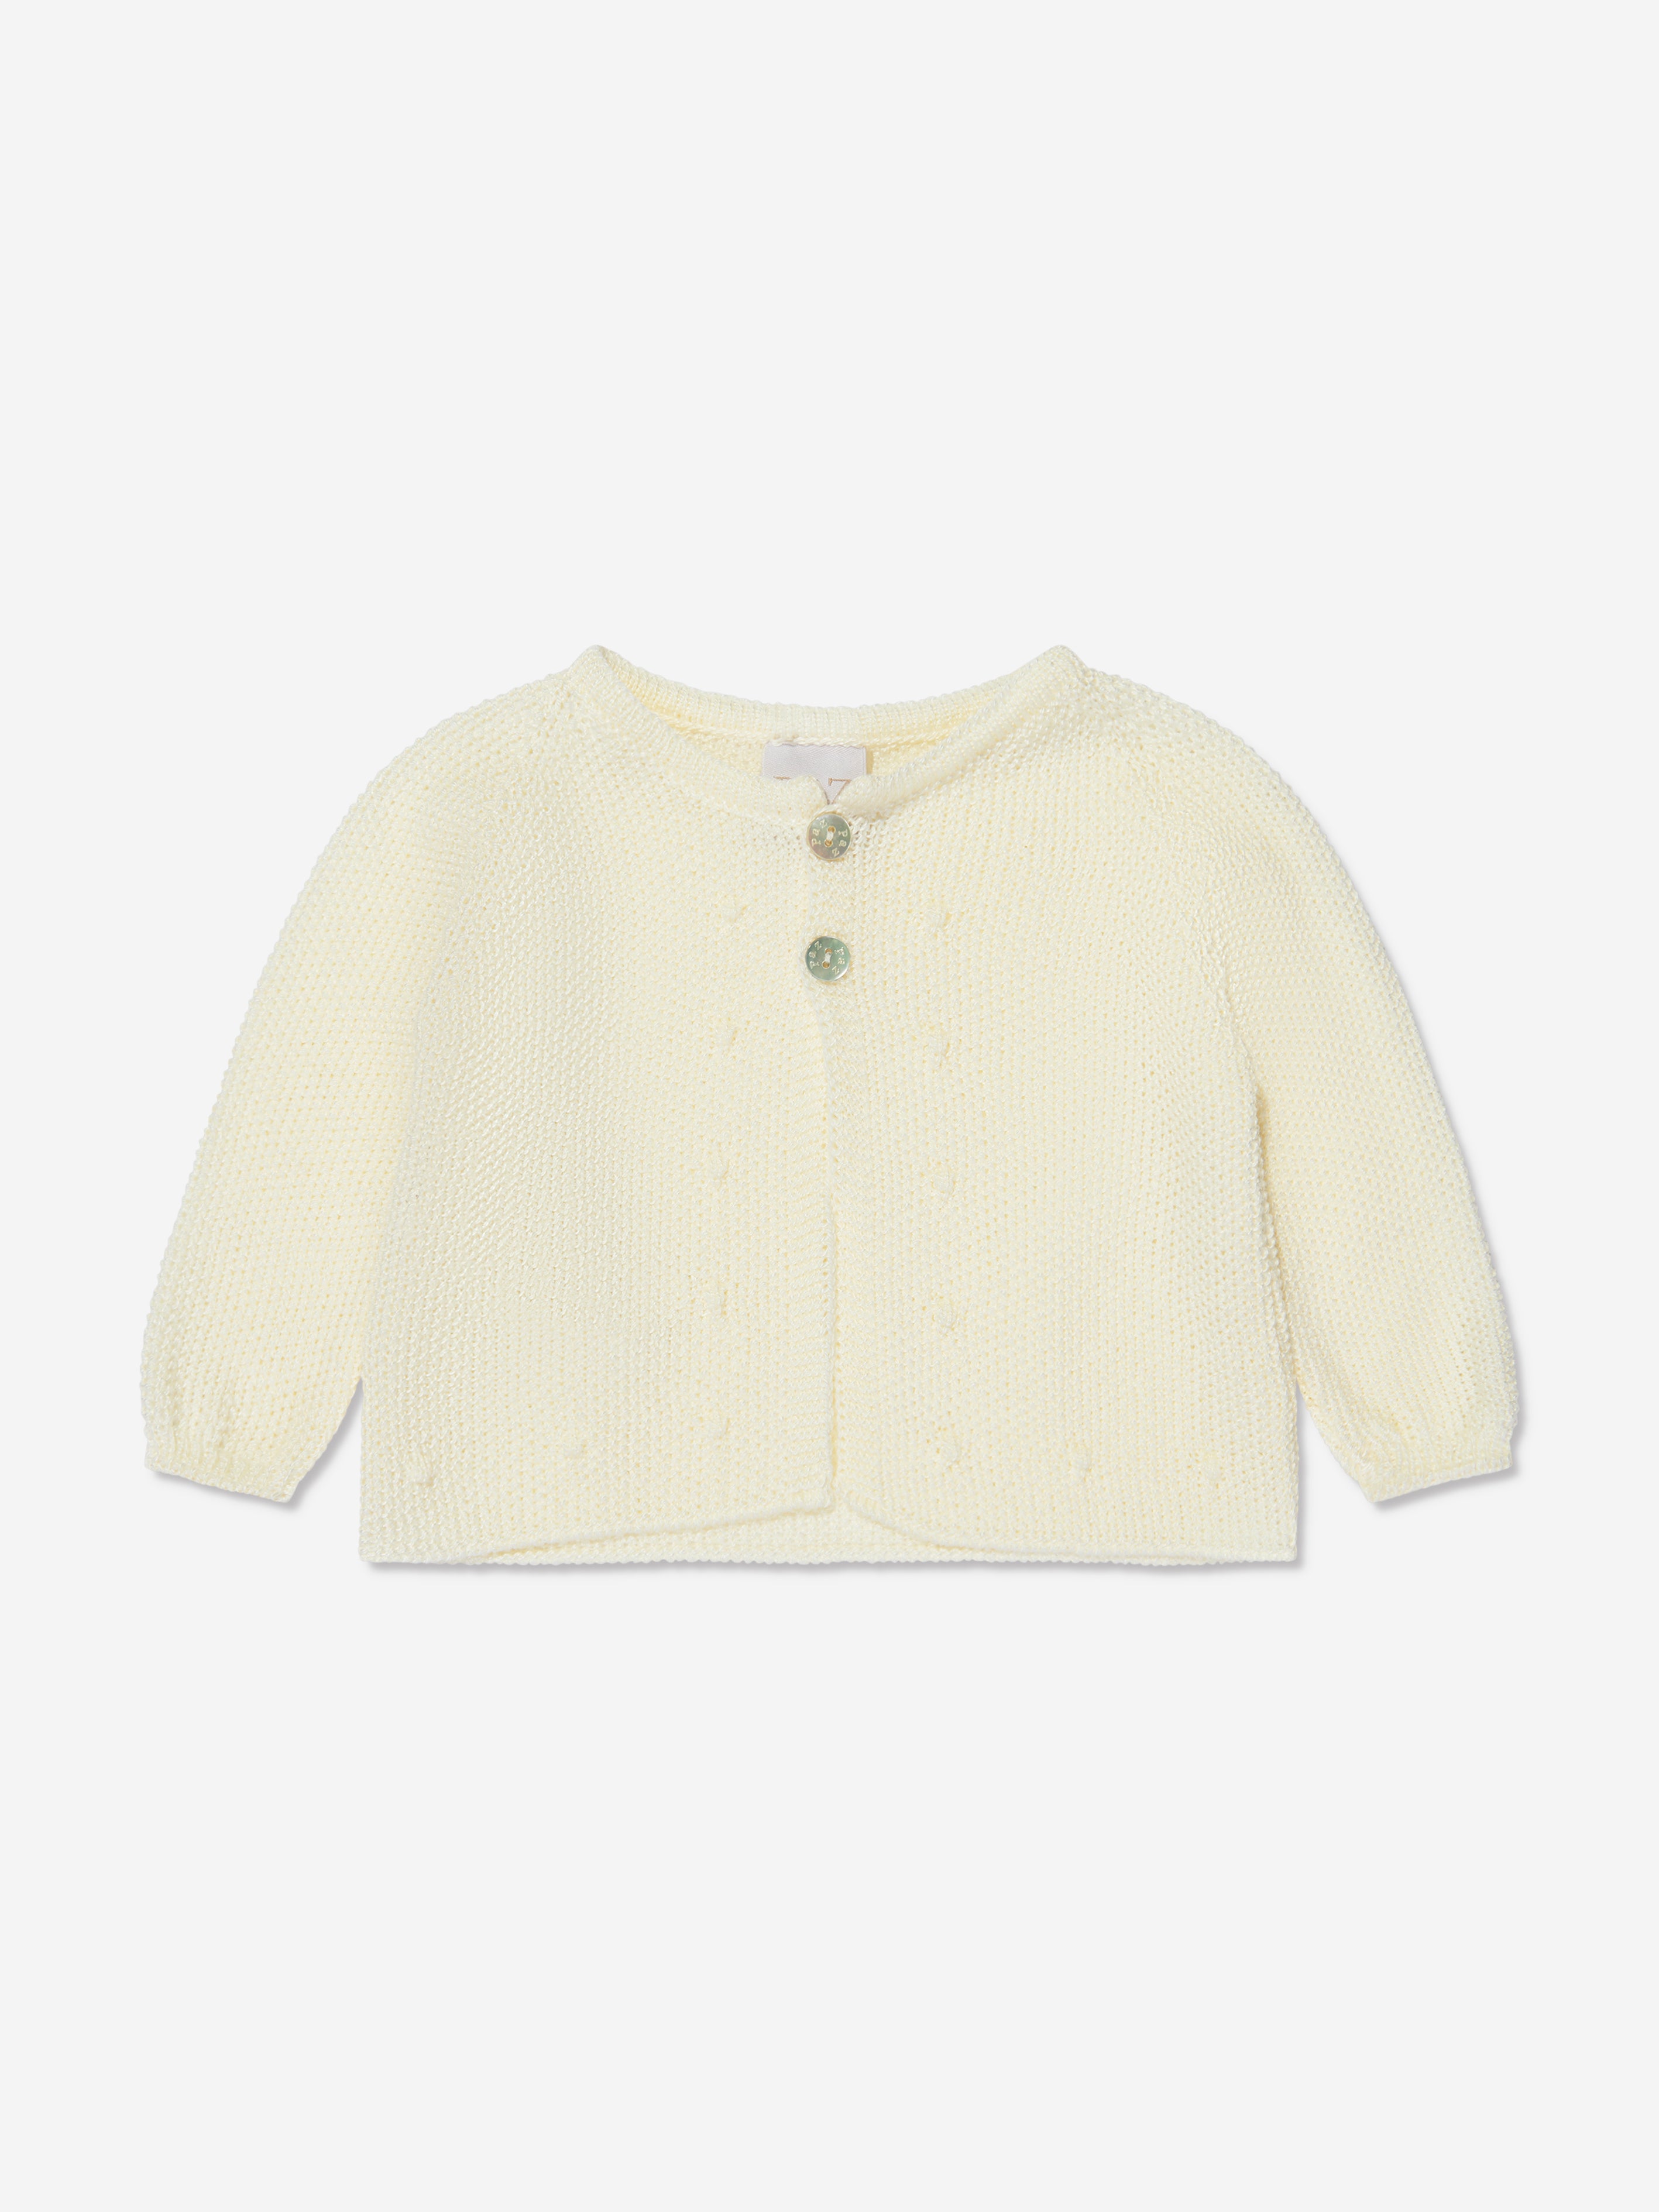 Paz Rodriguez Baby Knitted Cardigan In Ivory